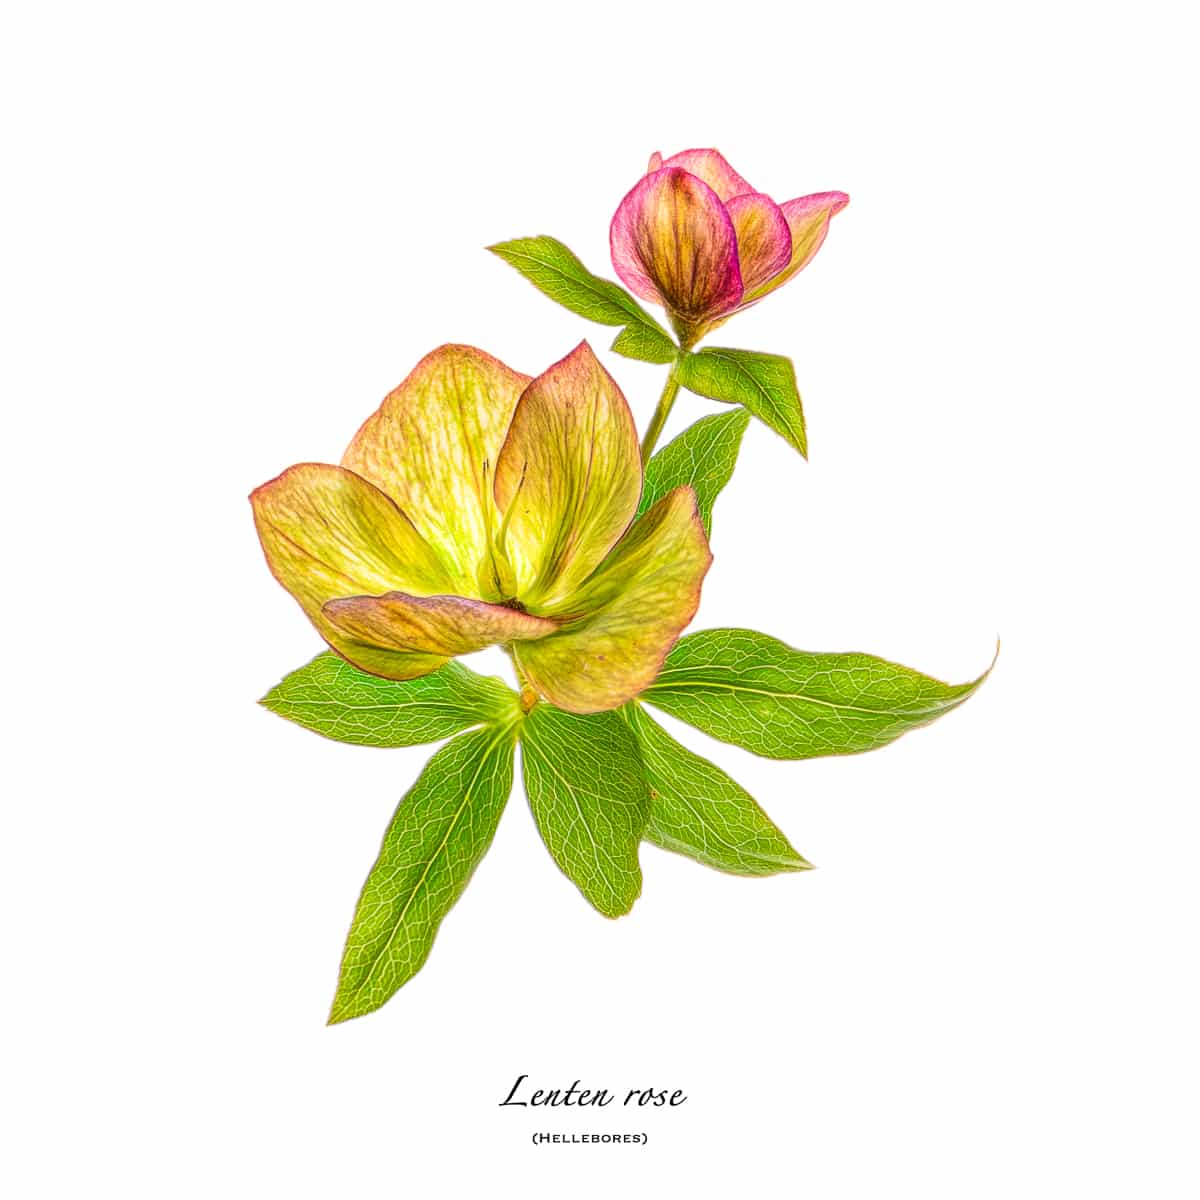 A portrait of an early spring Lenten Rose (hellebores) from our garden on white background.